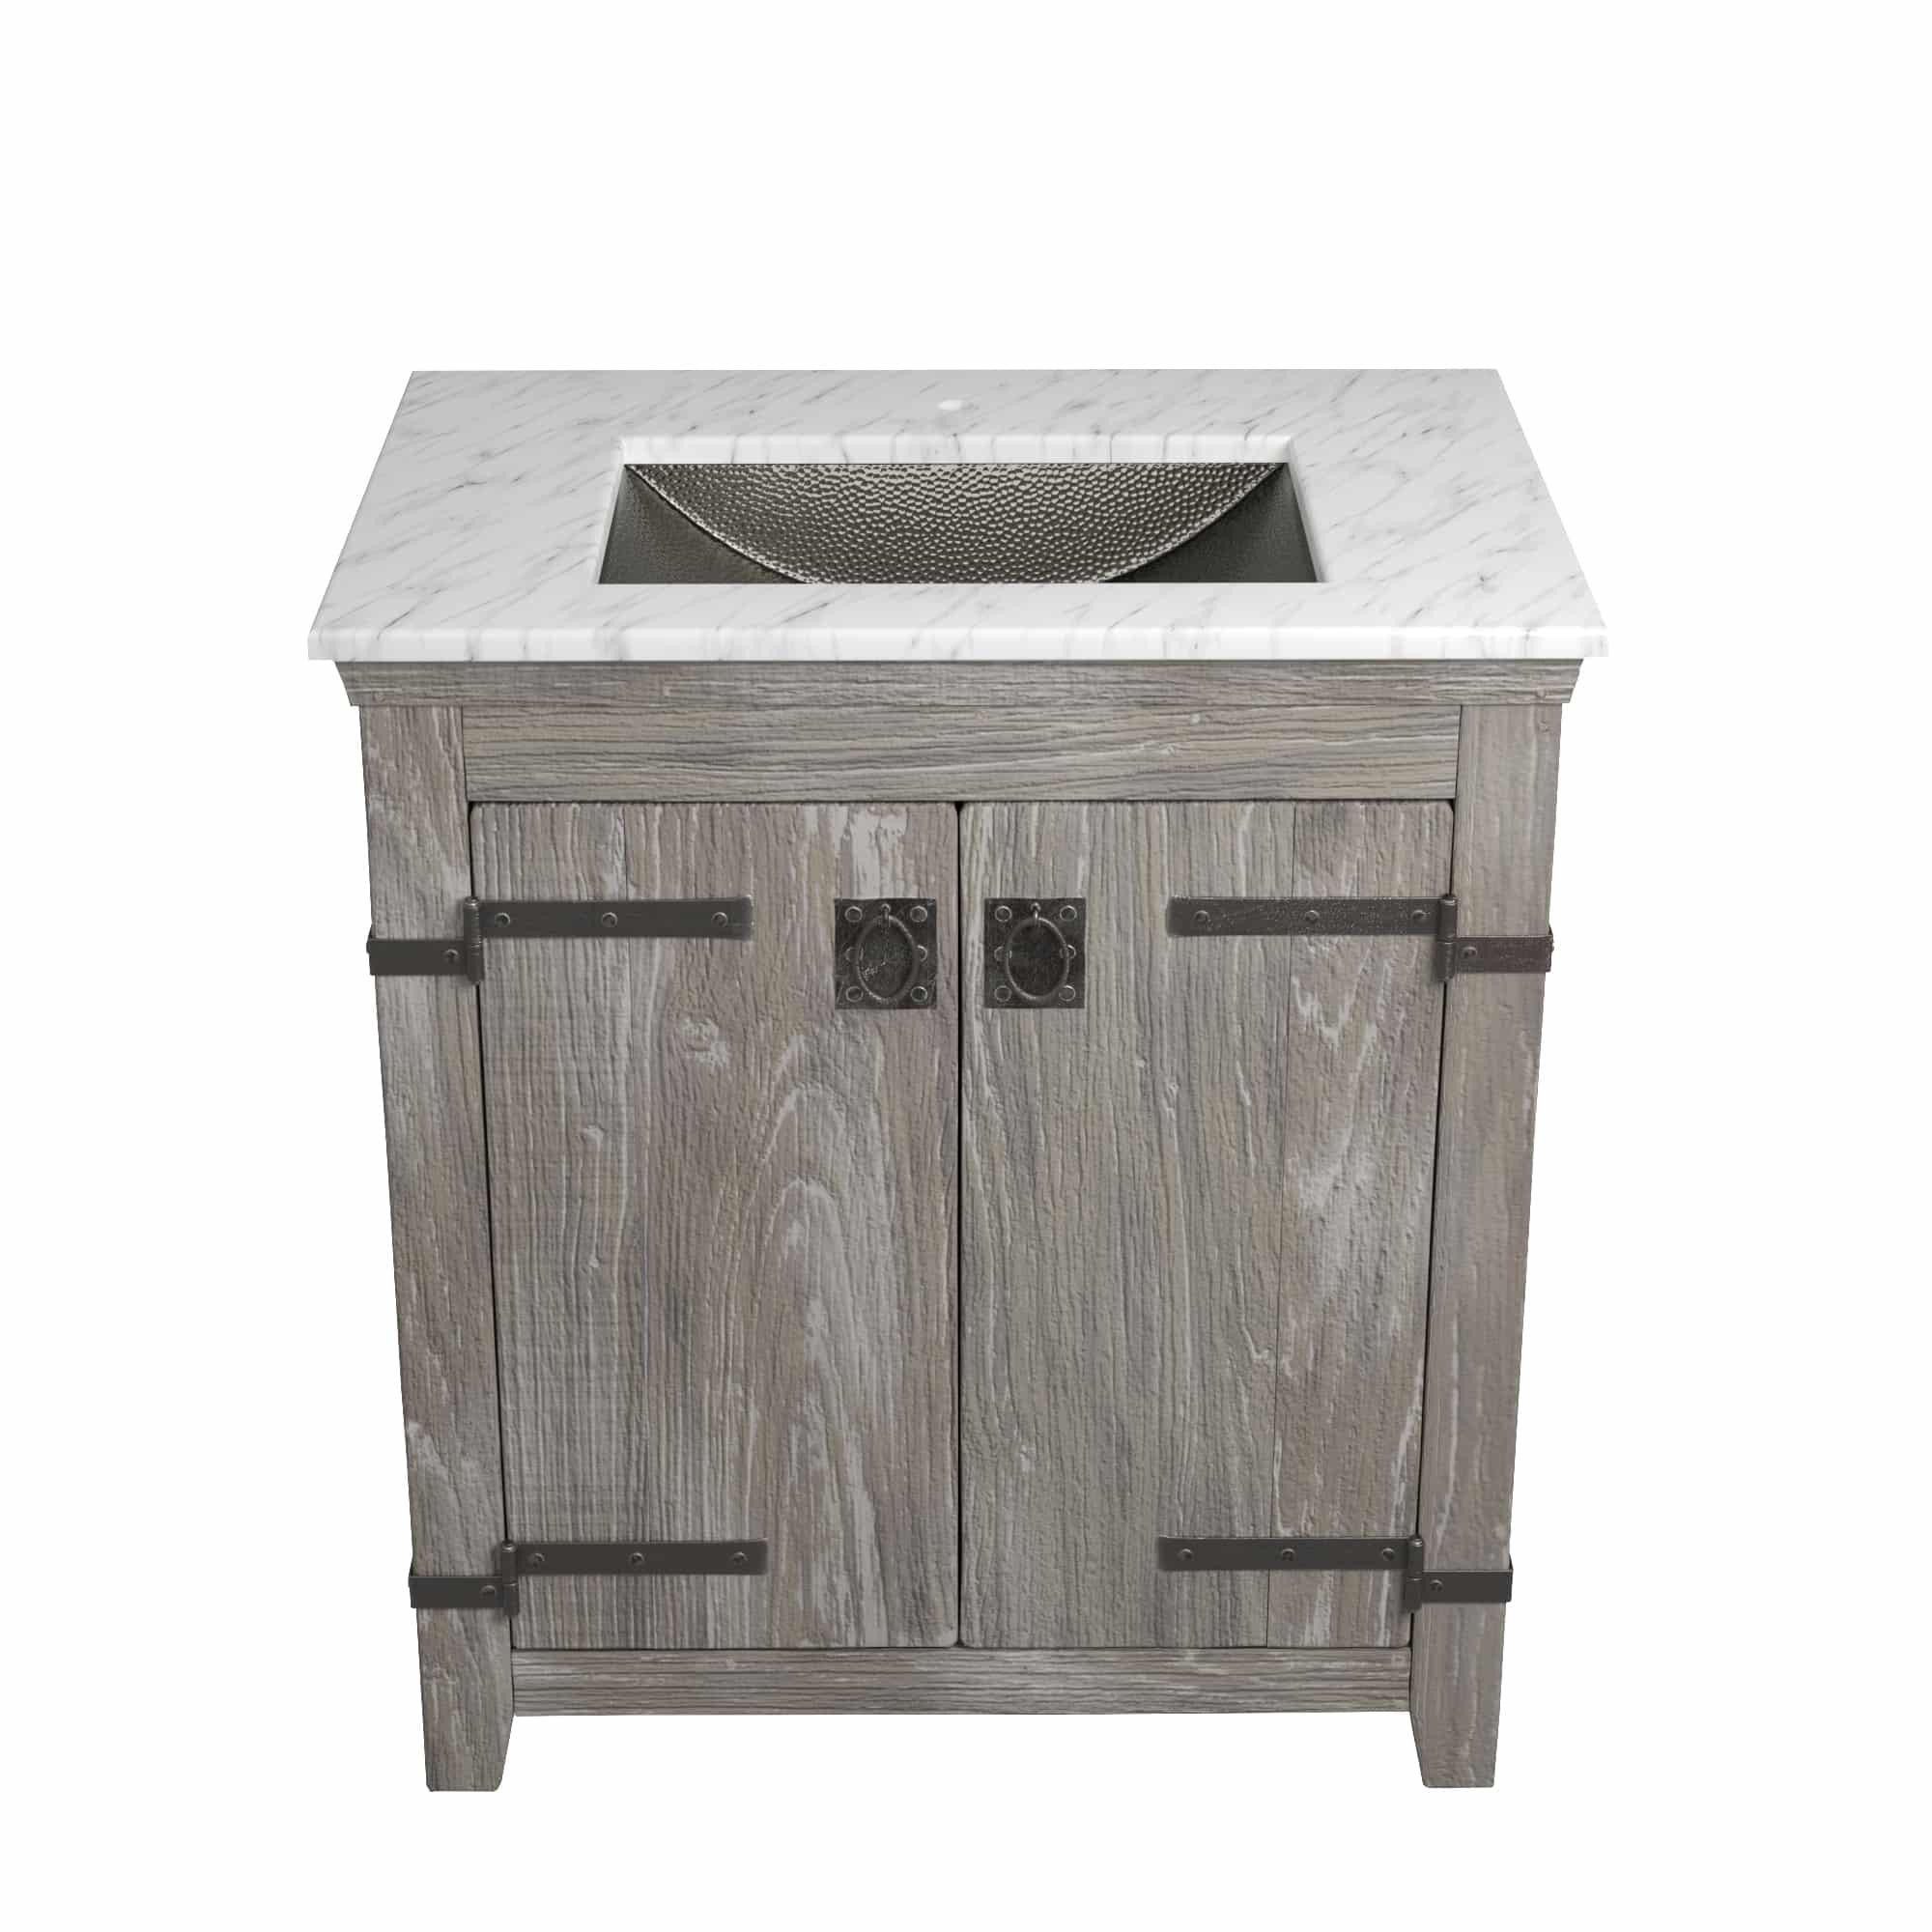 Native Trails 30" Americana Vanity in Driftwood with Carrara Marble Top and Avila in Polished Nickel, Single Faucet Hole, BND30-VB-CT-CP-031